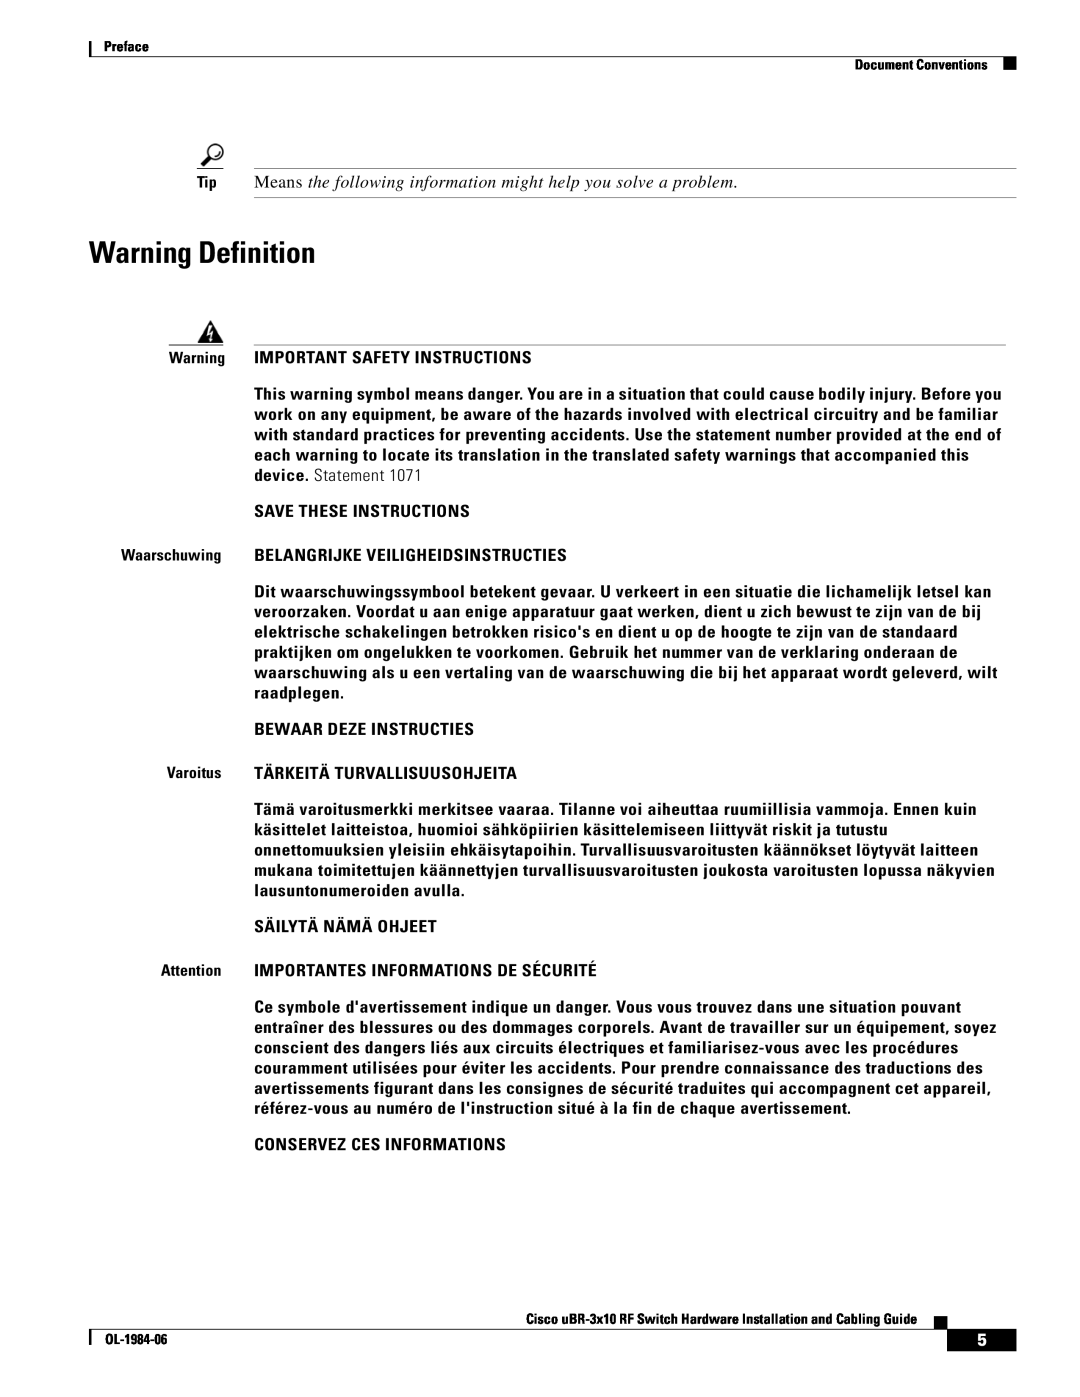 Cisco Systems UBR-3X10 manual Warning Definition, Tip Means the following information might help you solve a problem 